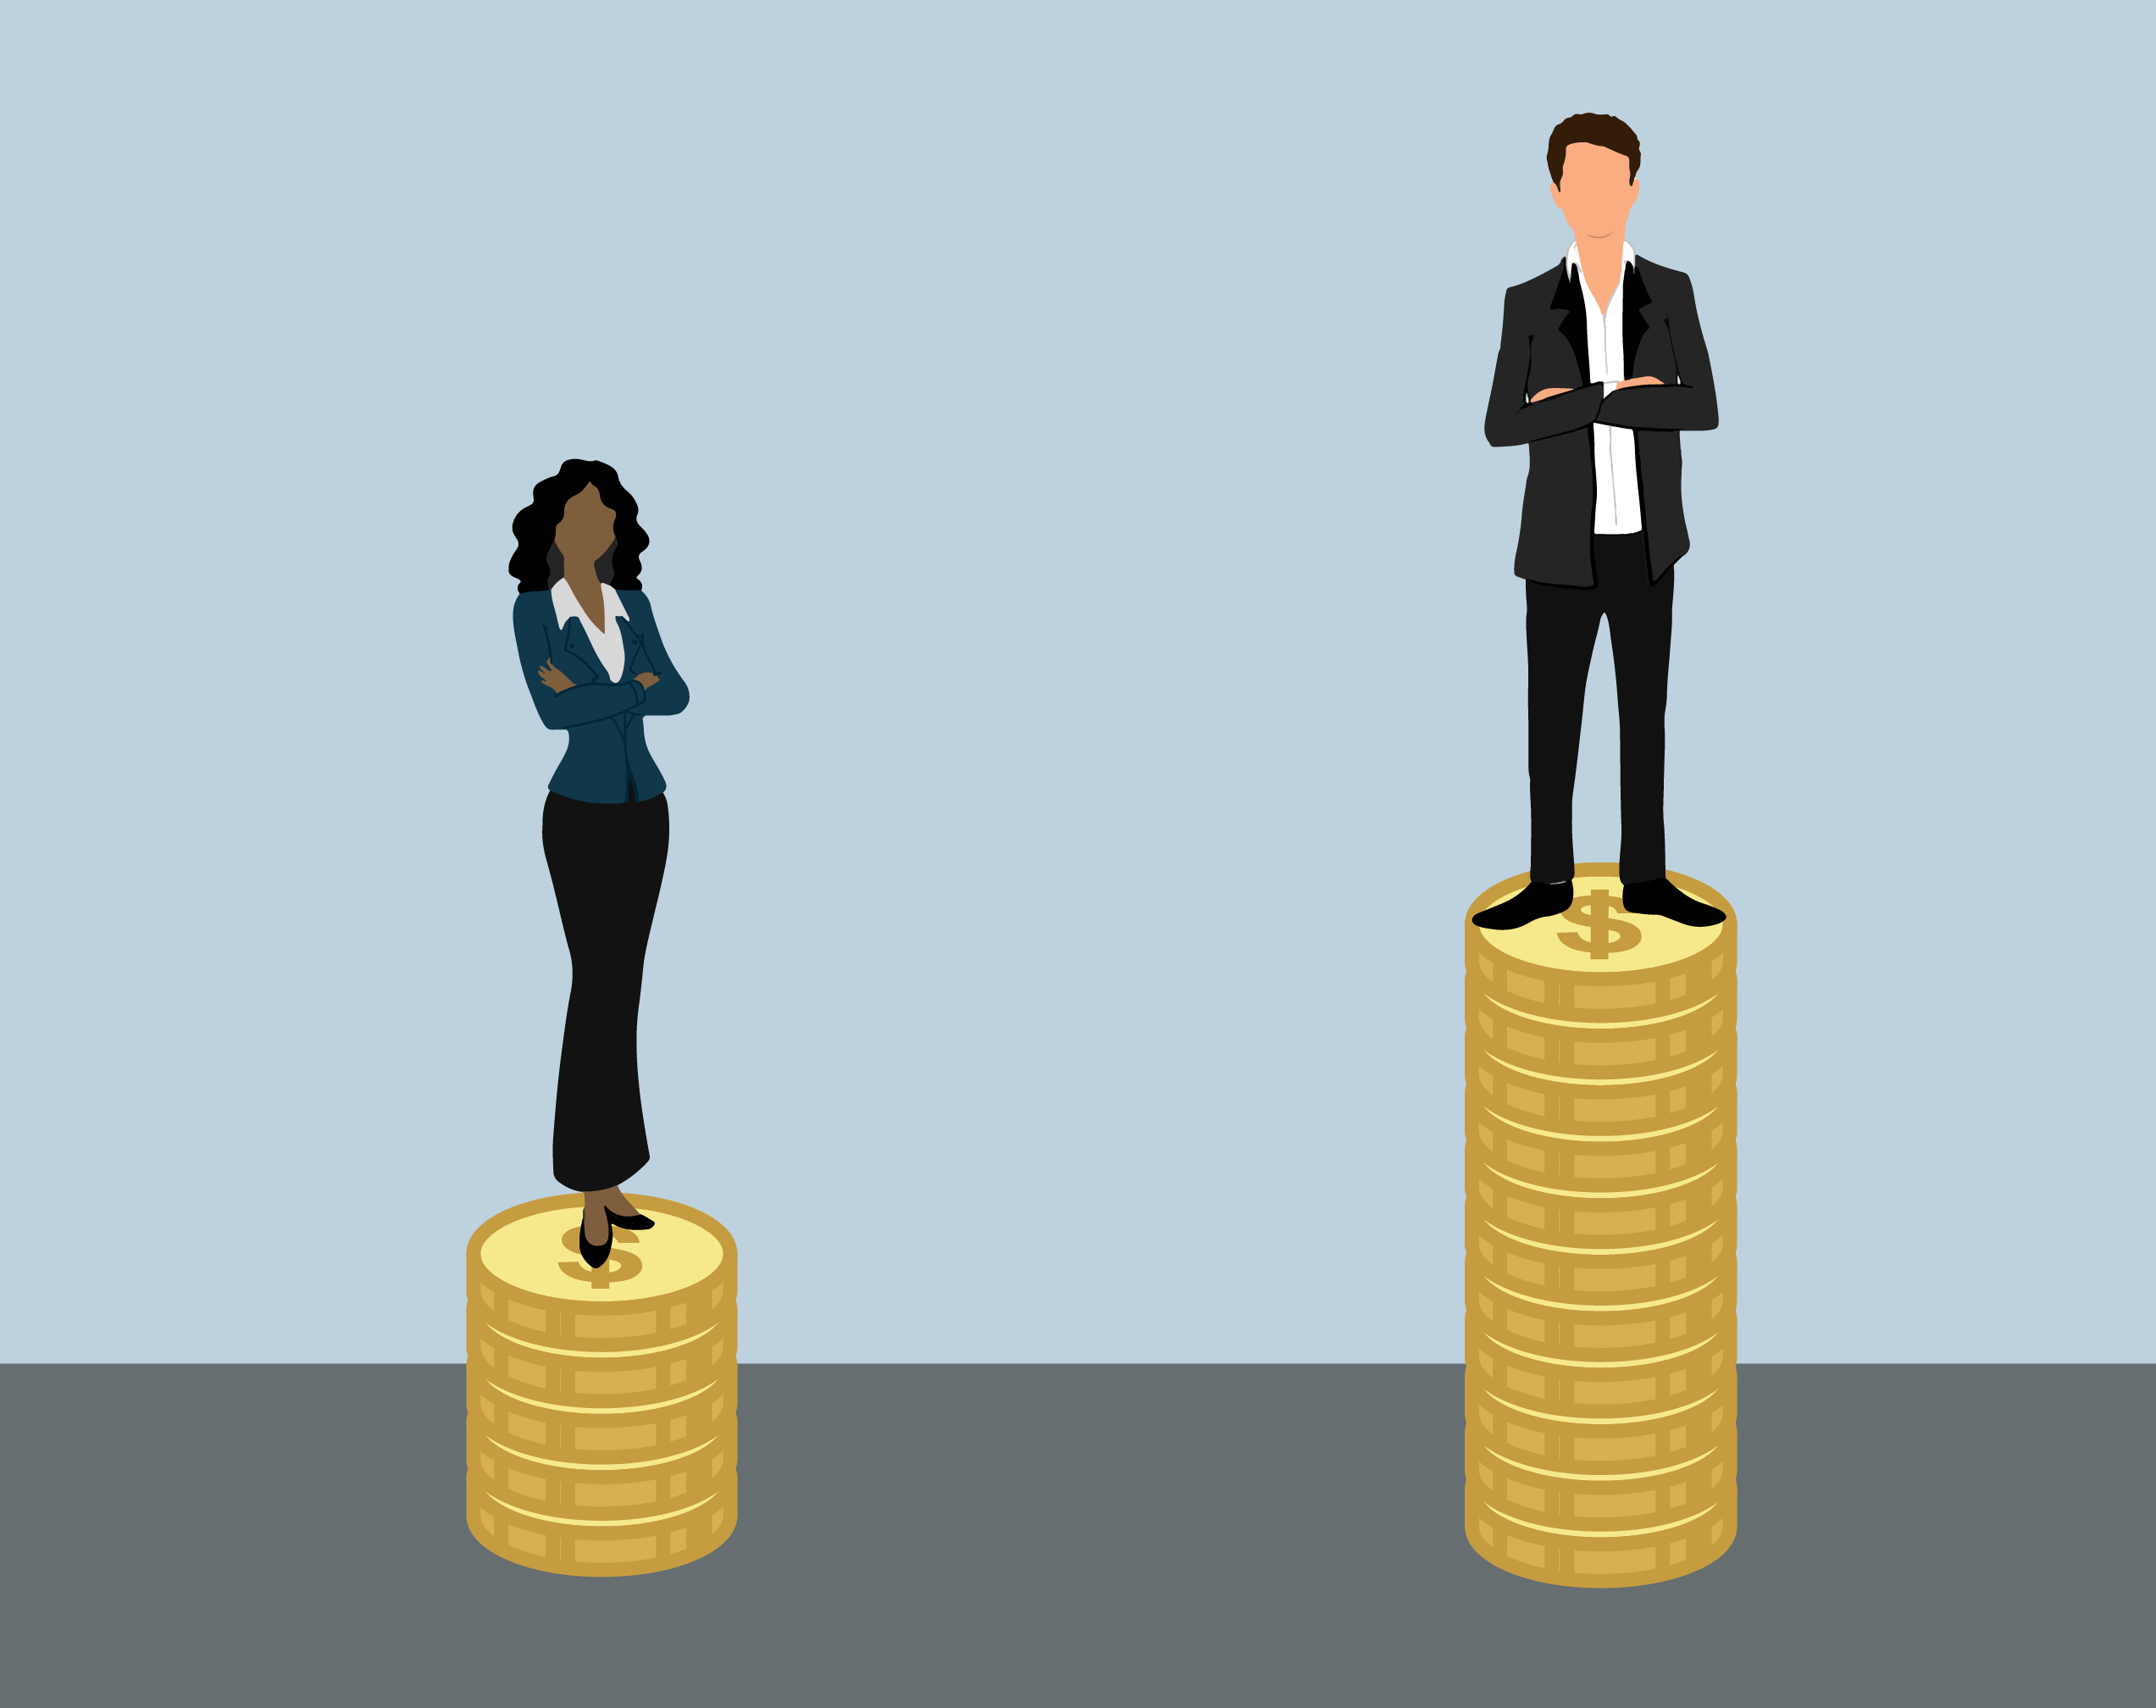 picture of two people standing on a stack of coins. One stack is noticeably smaller than the other